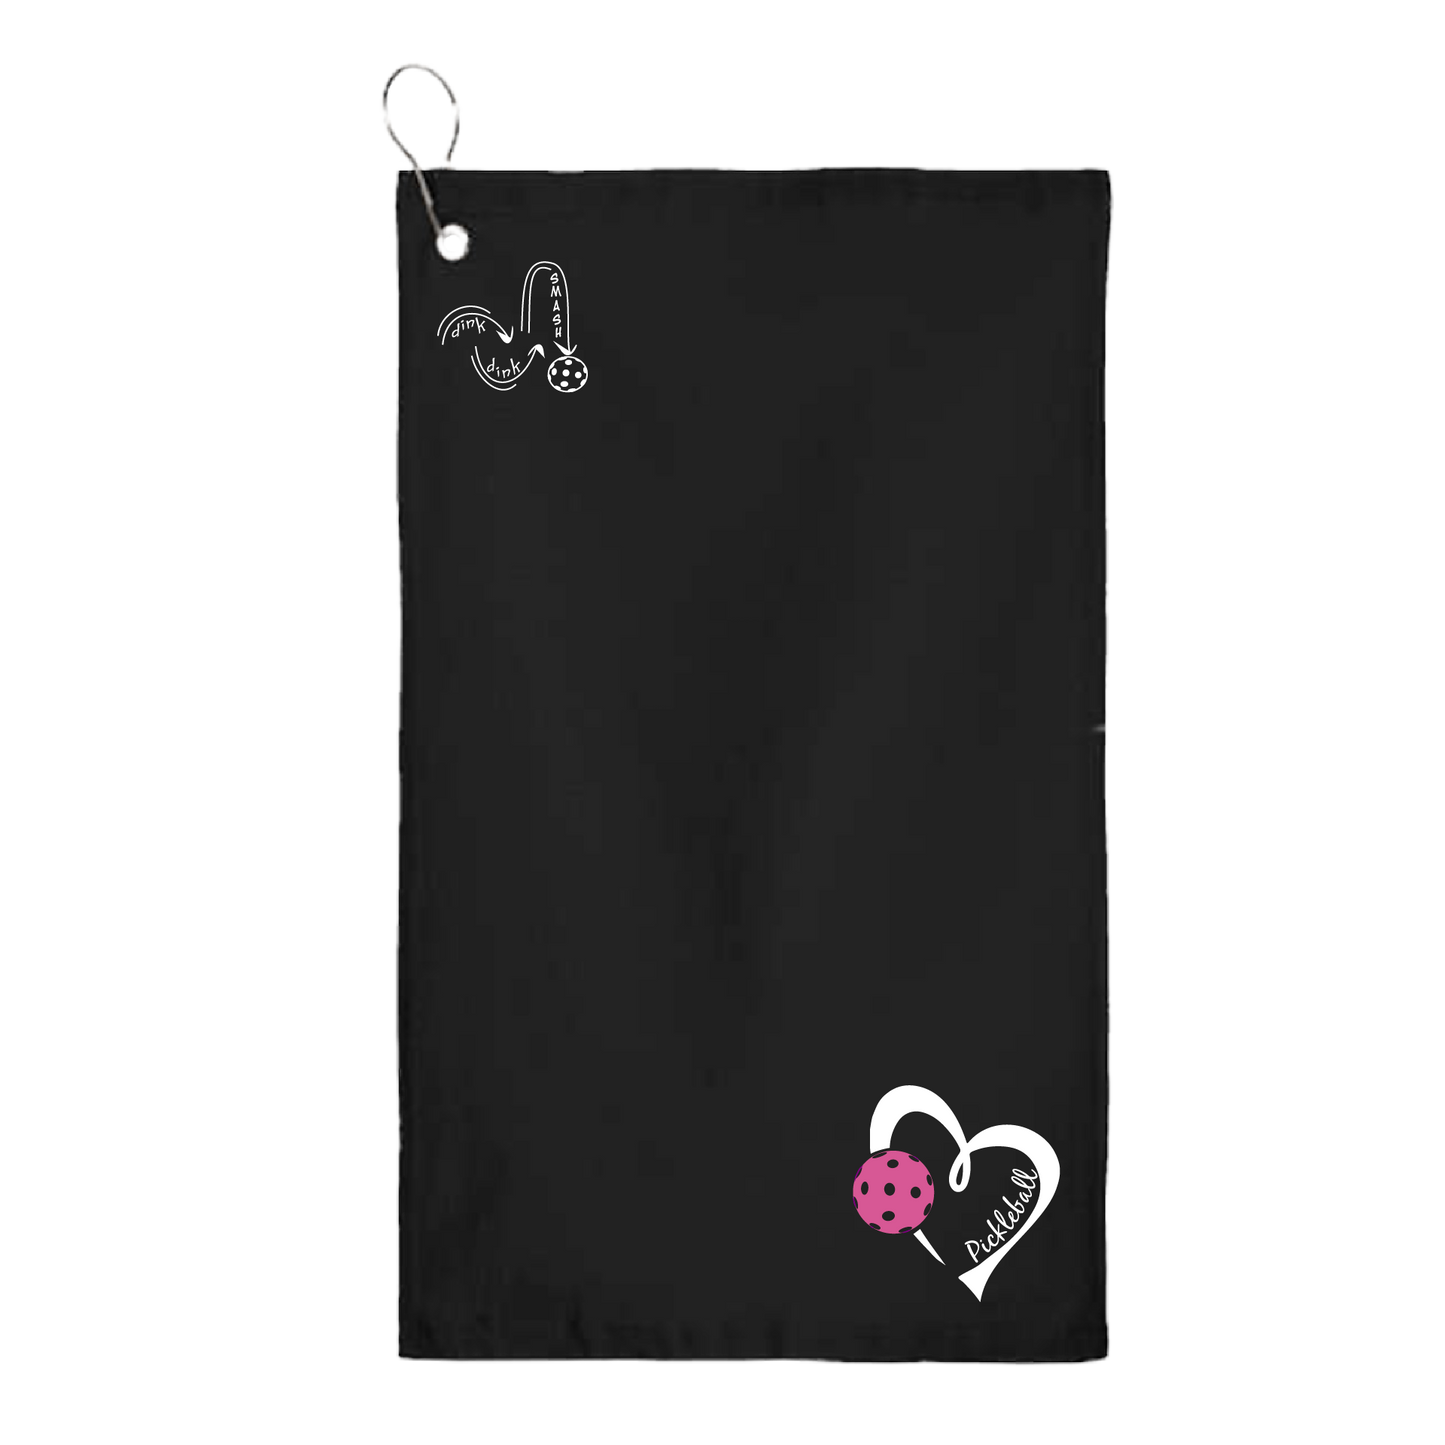 This Pickleball Love Heart and Pink Pickleball towel is crafted with cotton terry velour for optimal performance. It features grommets, hooks, and hemmed edges for added durability. It's perfect for completing your pickleball gear, and an ideal gift for friends and tournaments. The towel is designed to be both absorbent and lightweight, so you can remain dry and comfortable while you play.